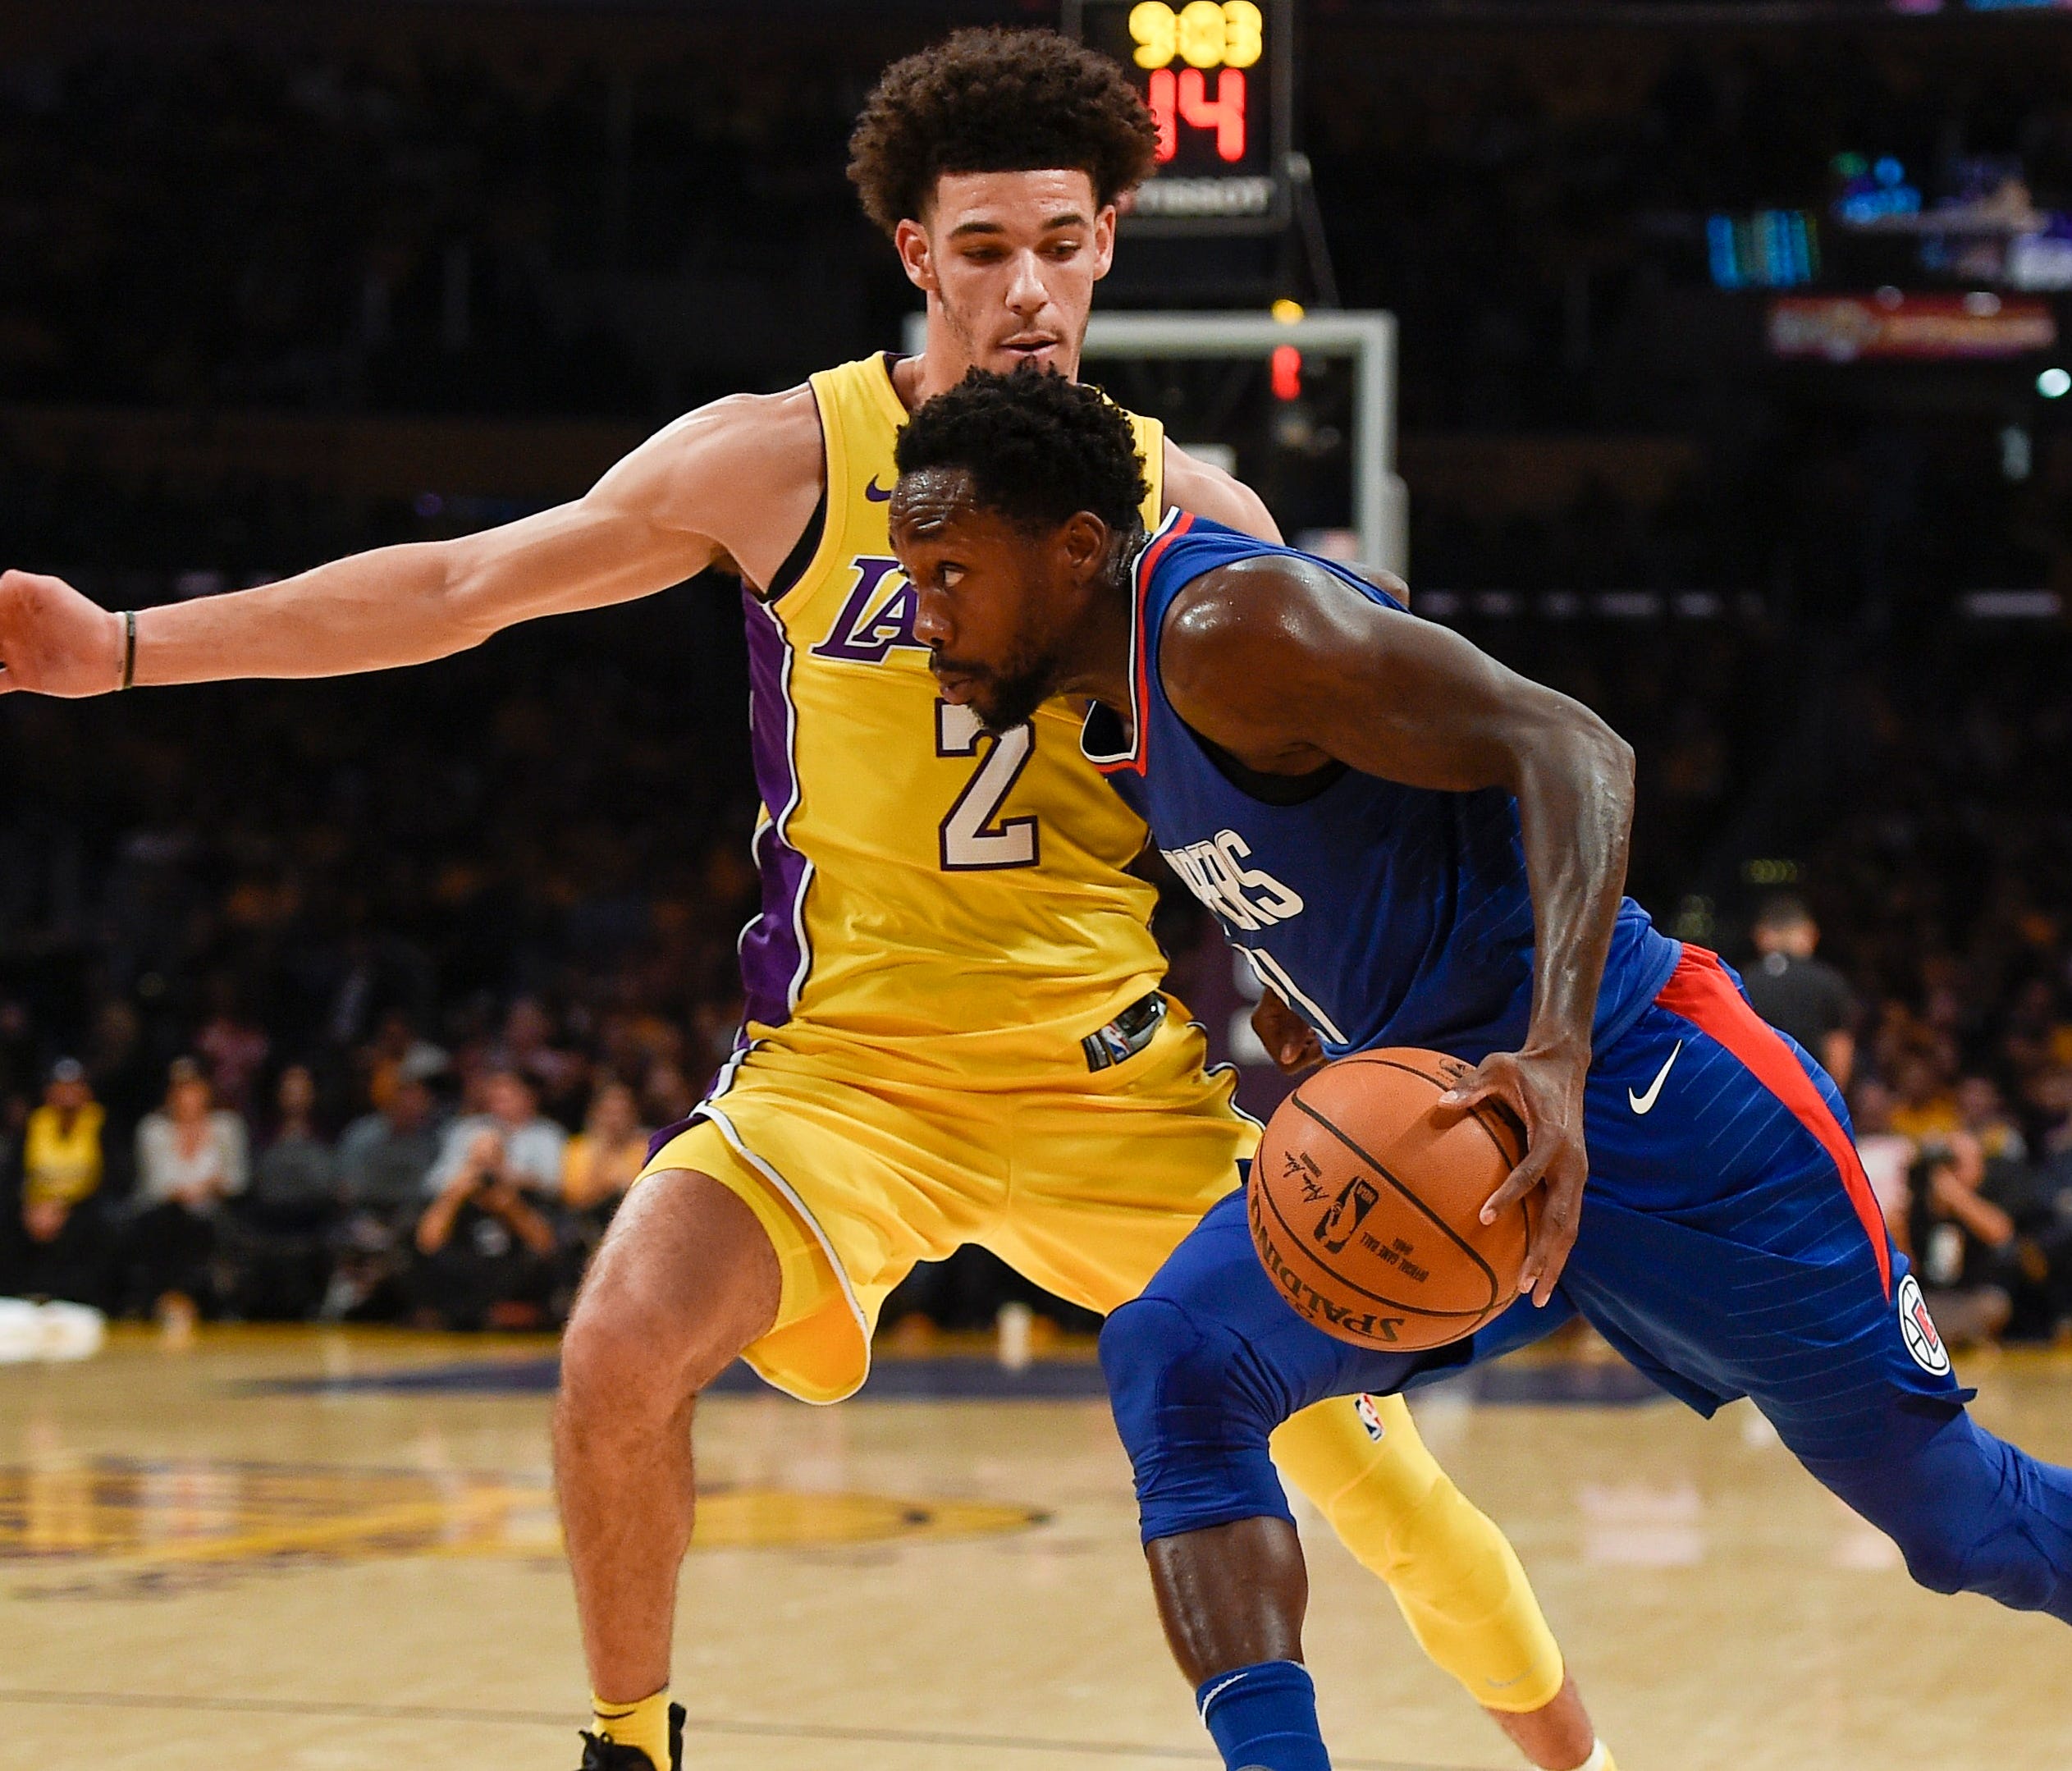 Patrick Beverley and the Clippers rolled to a 108-92 win over the Lakers in Lonzo Ball's debut.